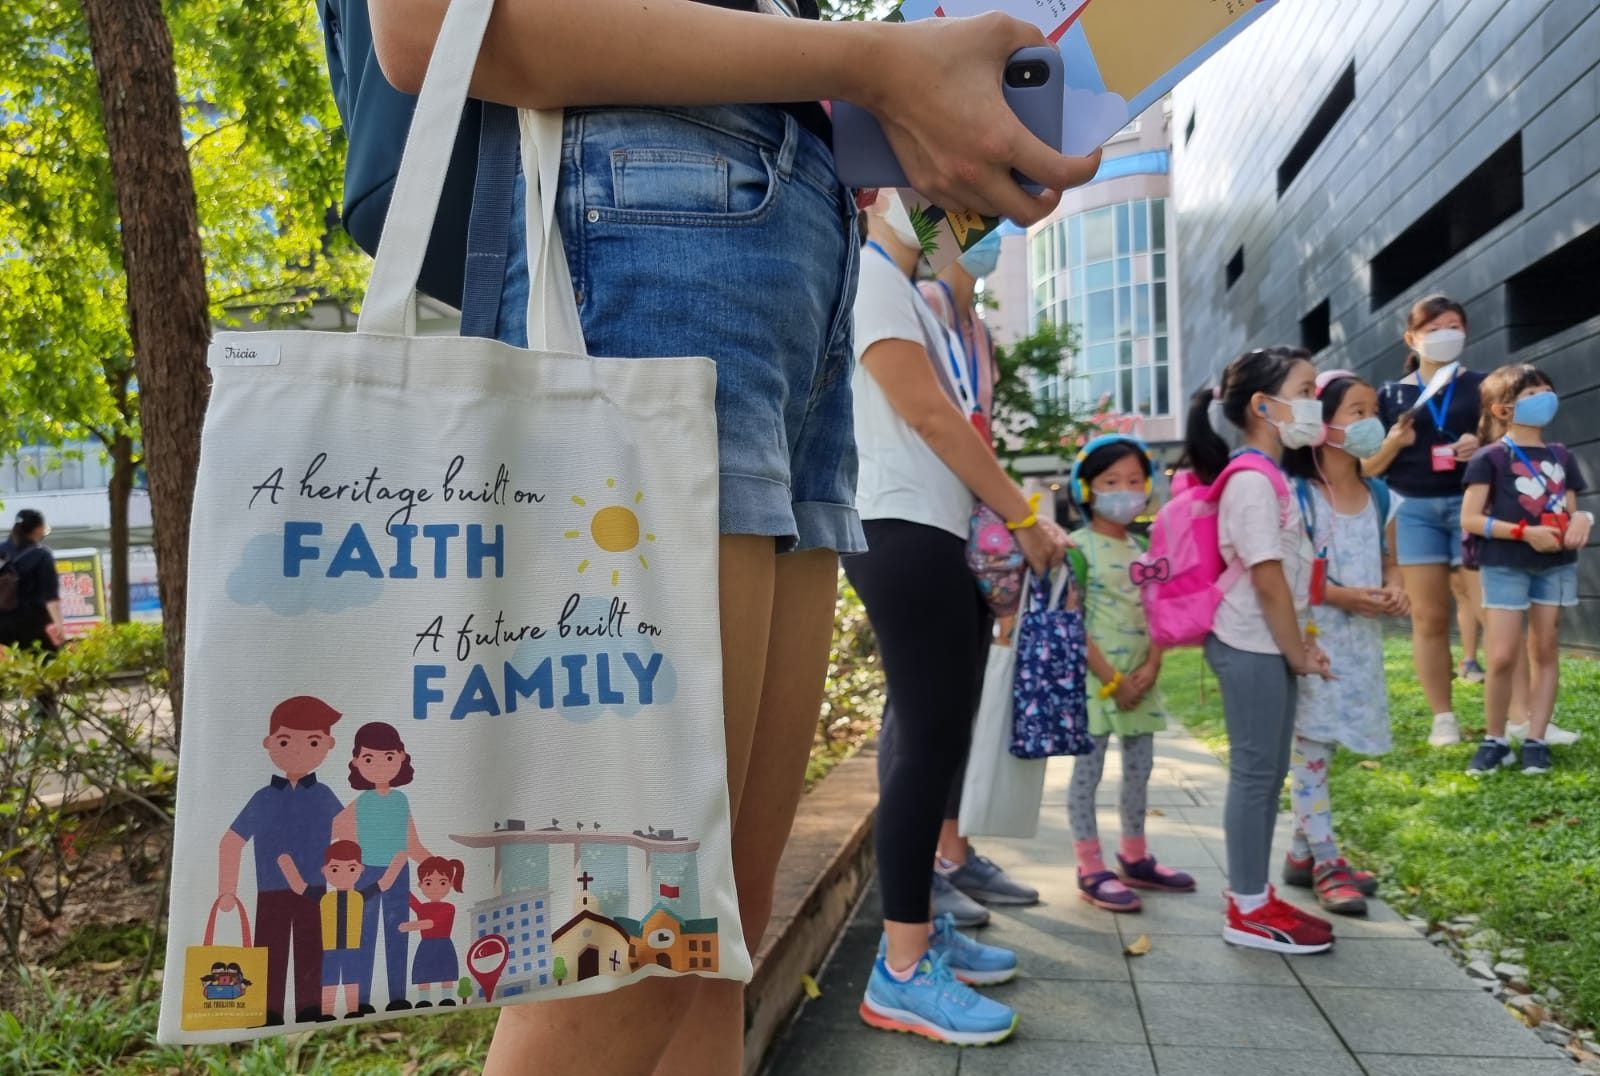 “We want to see faith at home, built on a foundation of good. We want to see children and families growing closer to God, and to each other,” says Esther Foong of initiatives by The Treasure Box, which include this heritage trail. Photo courtesy of The Treasure Box.